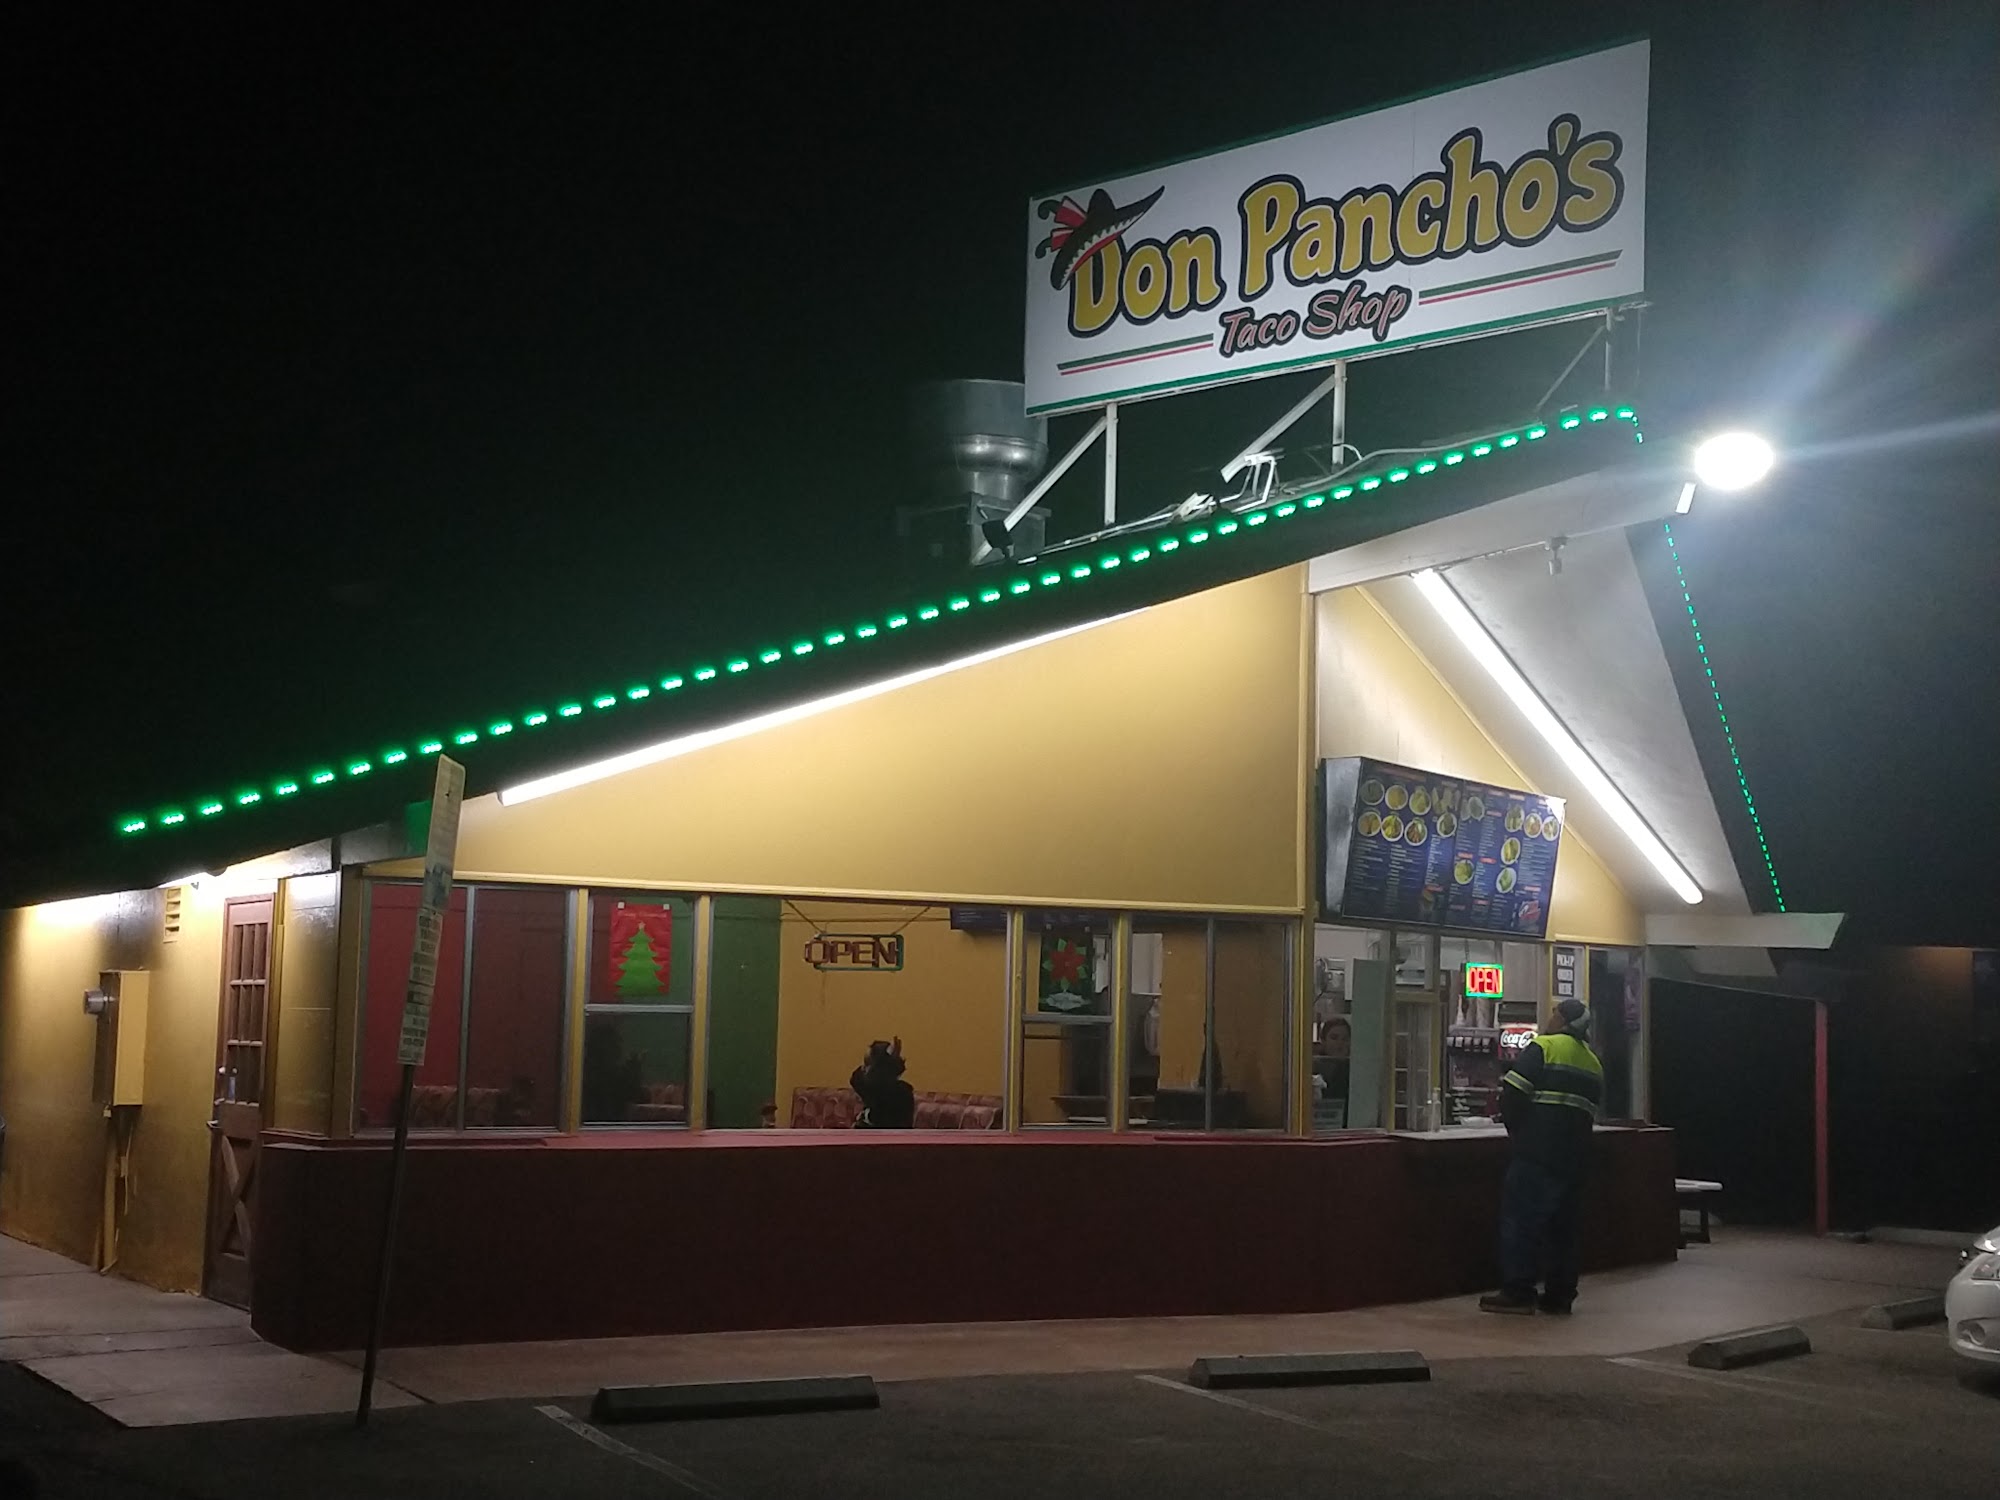 Don Pancho's Mexican Food